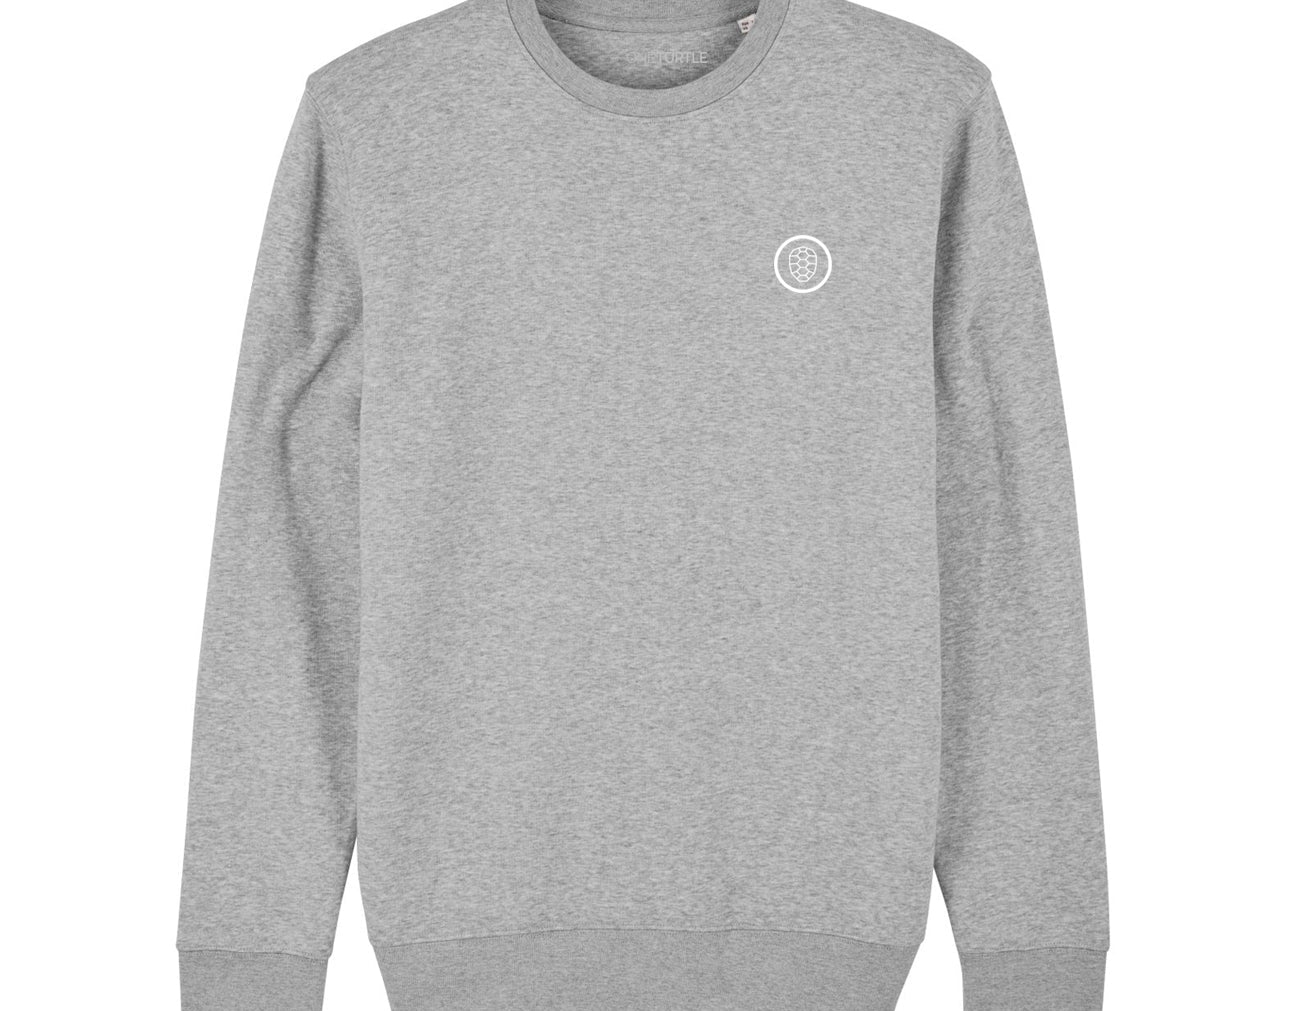 PlanetAir in Heather Grey - ONETURTLE